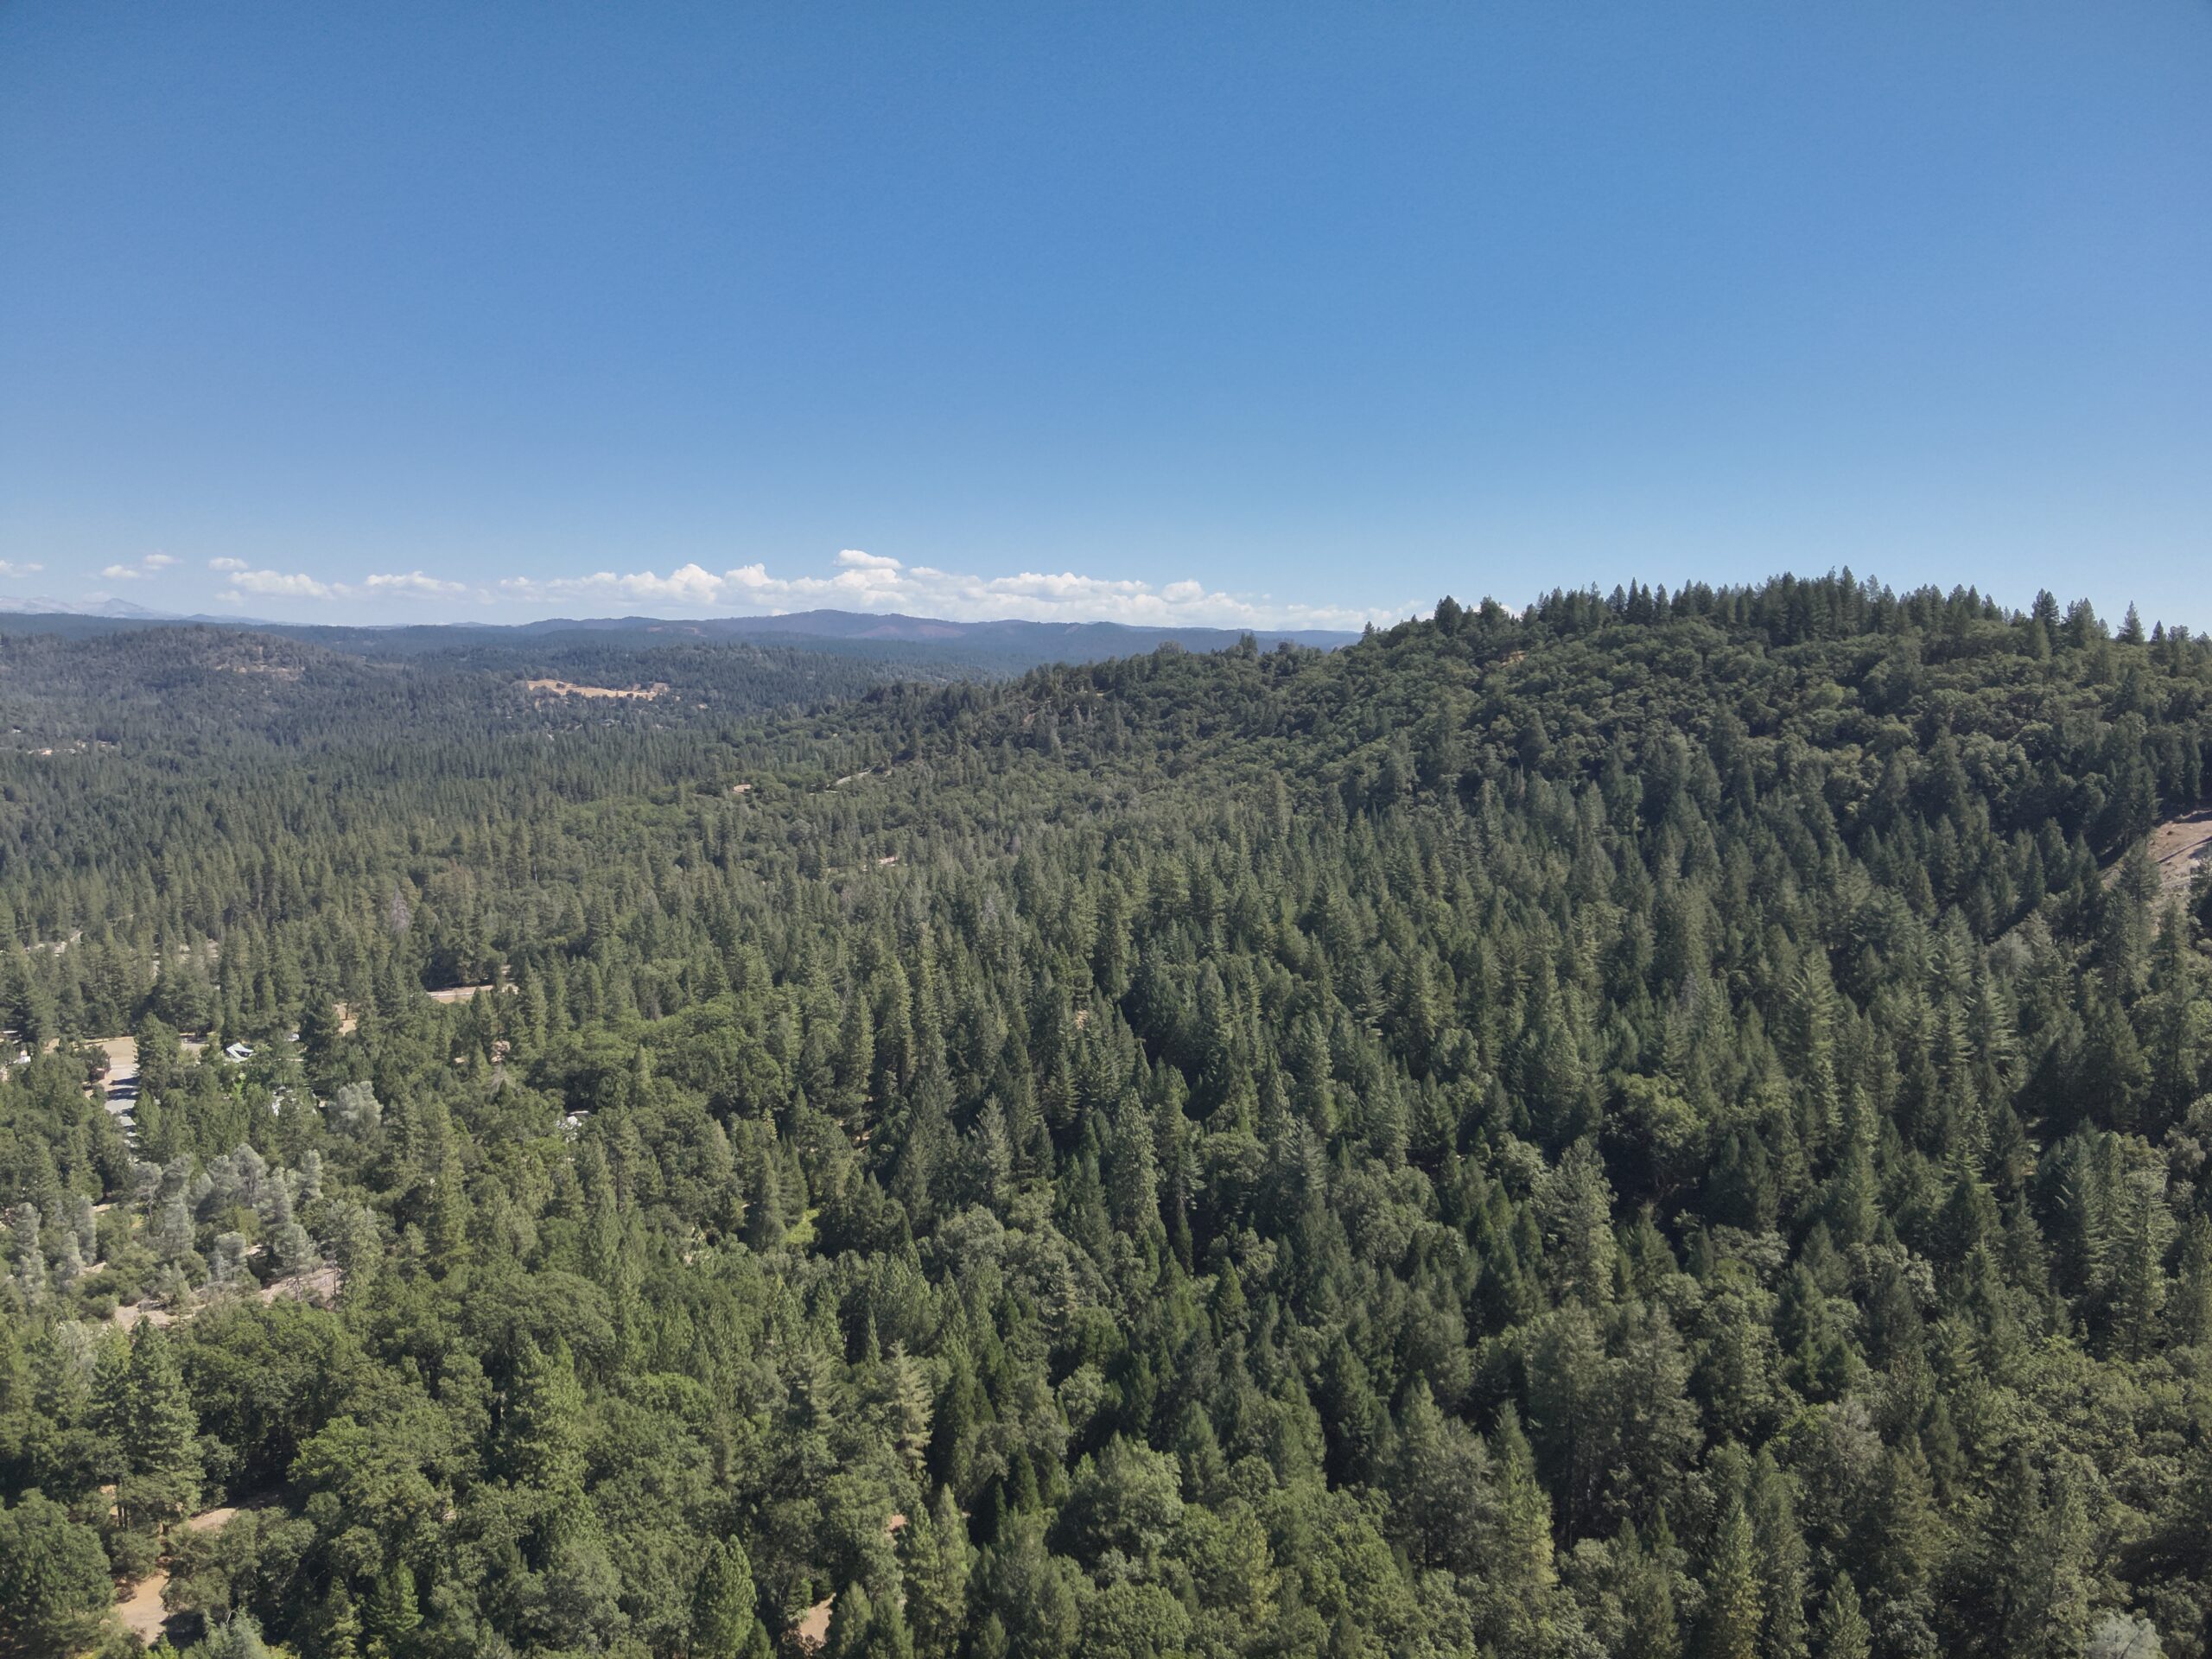 Spectacular aerial view of El Dorado County captured by Richard Hockett Roofing, highlighting the stunning landscapes and our roofing projects in the area.